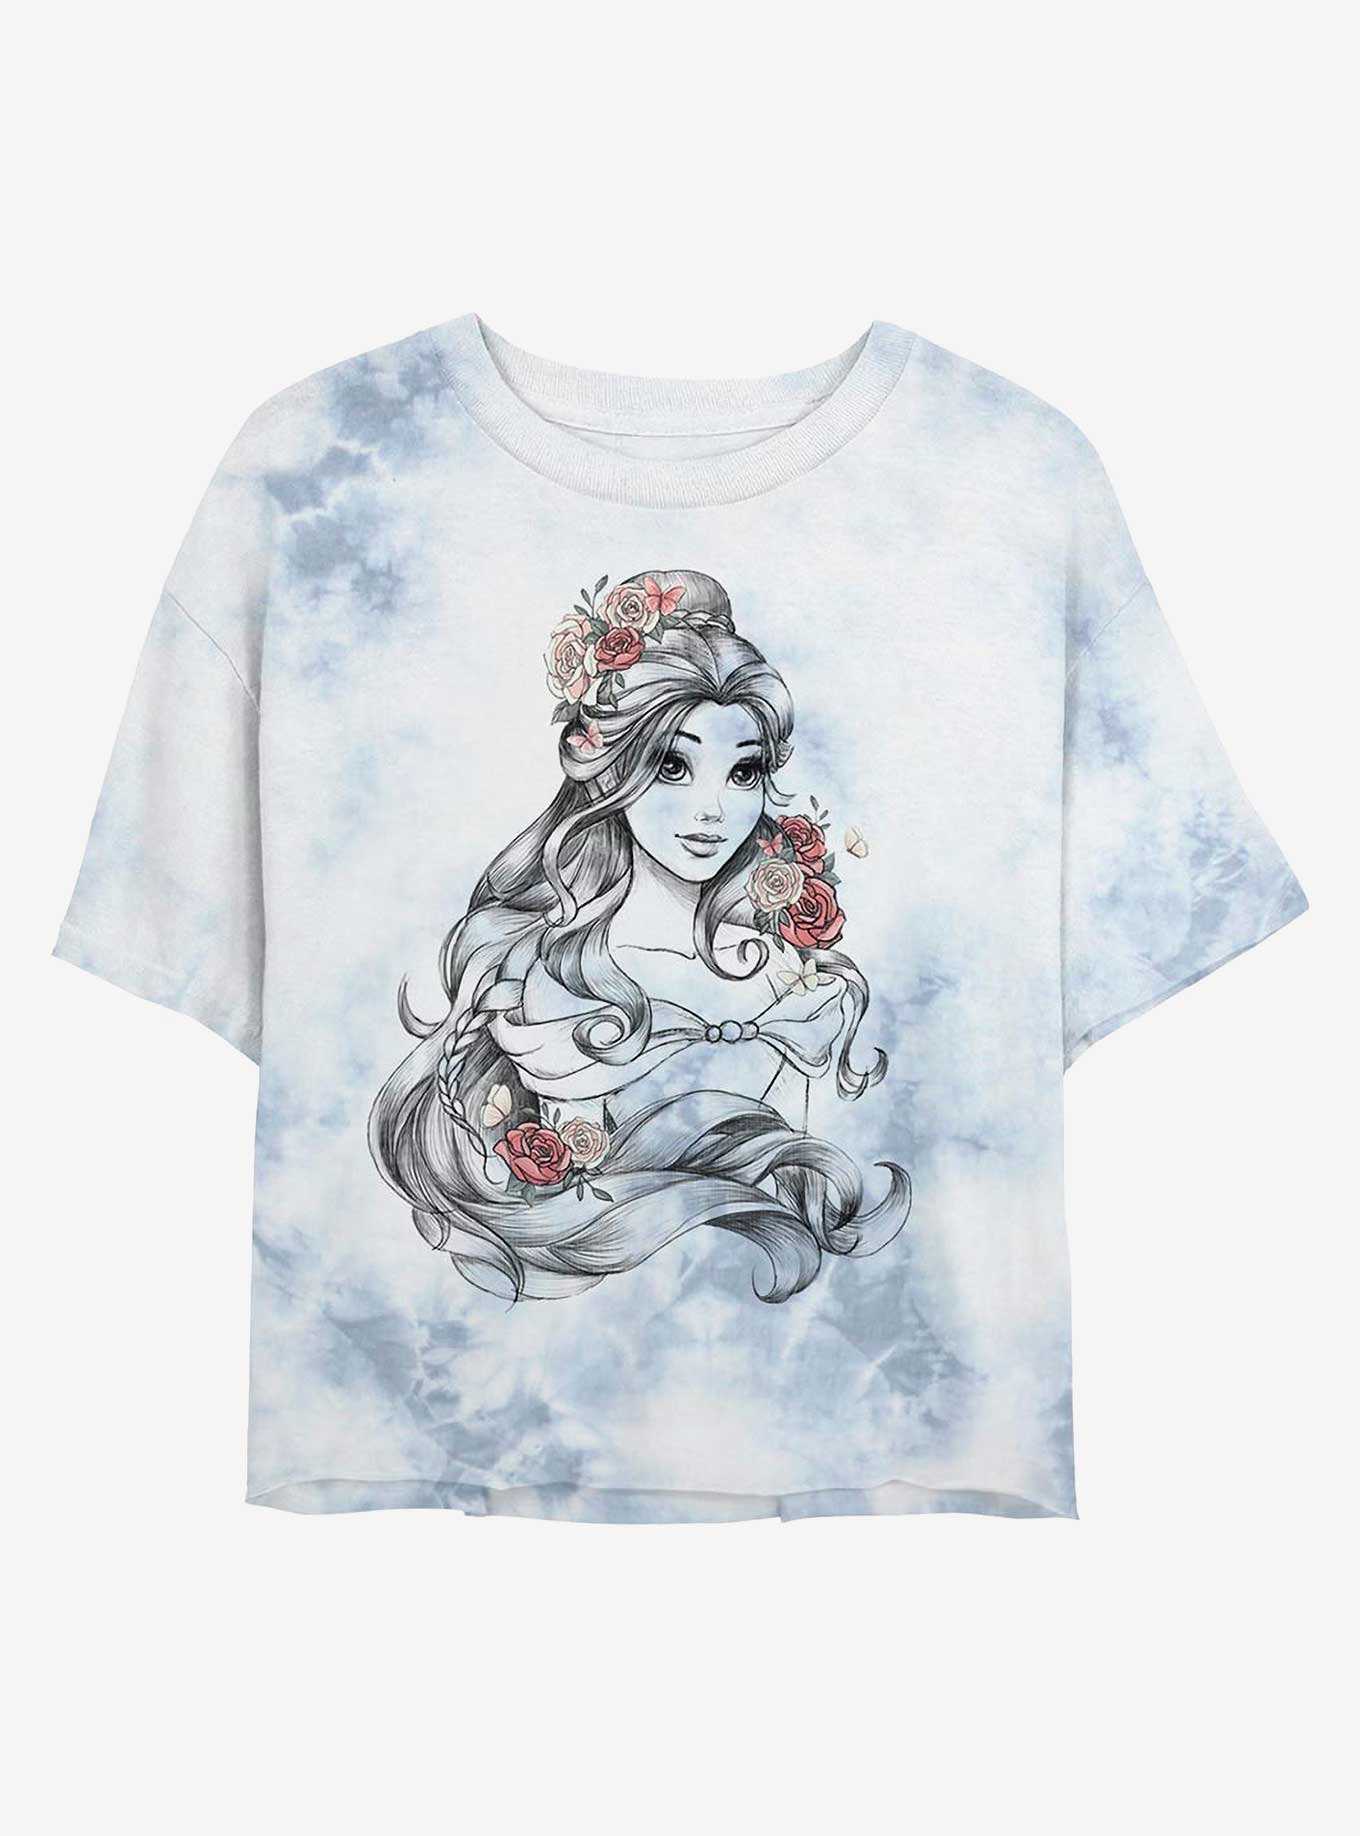 Disney Beauty and the Beast Belle of the Ball Tie-Dye Girls Crop T-Shirt, , hi-res